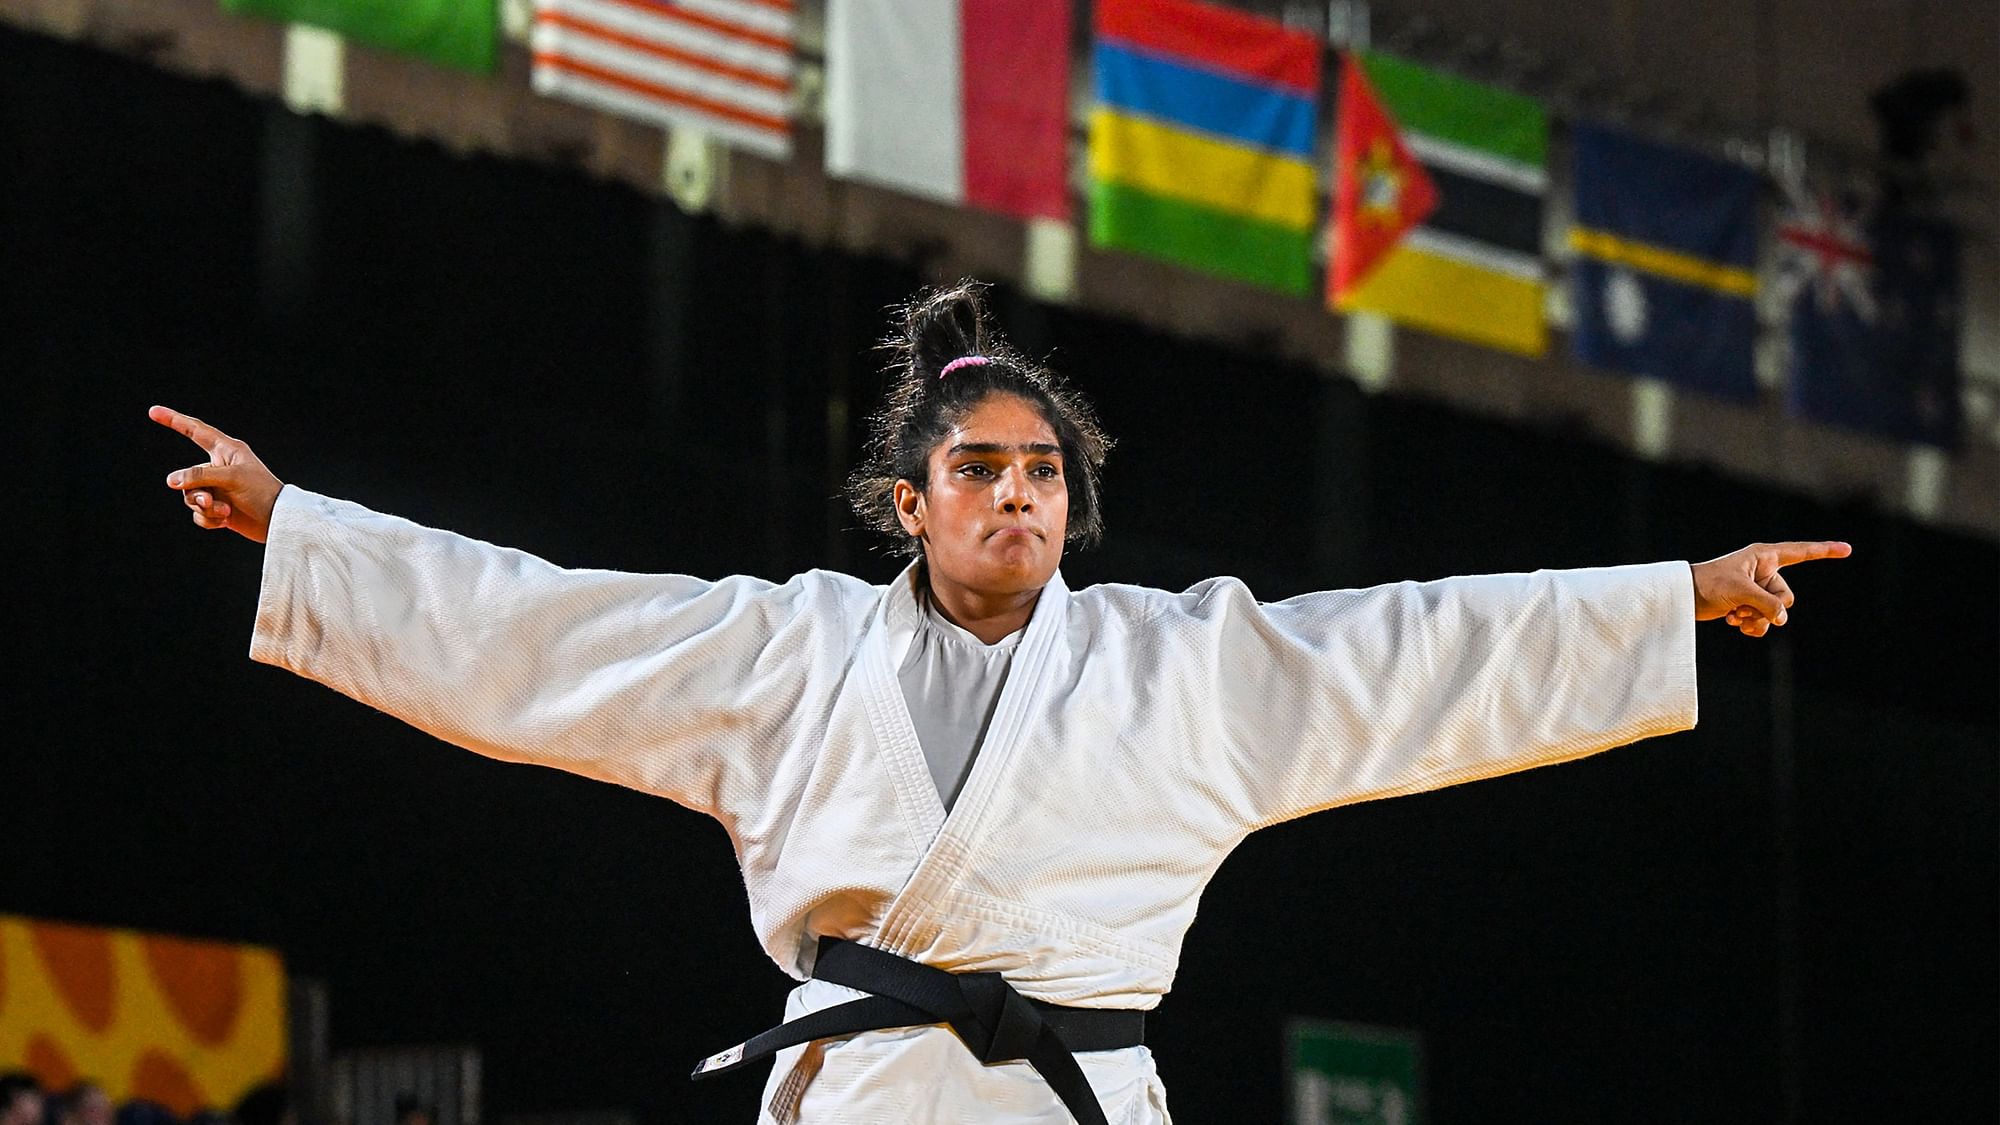 <div class="paragraphs"><p>India's&nbsp;Tulika Maan grabbed a silver medal in the women's +78kg judo final at the 2022 <a href="https://www.thequint.com/topic/2022-commonwealth-games">Commonwealth Games</a> in Birmingham on Wednesday.&nbsp;</p></div>